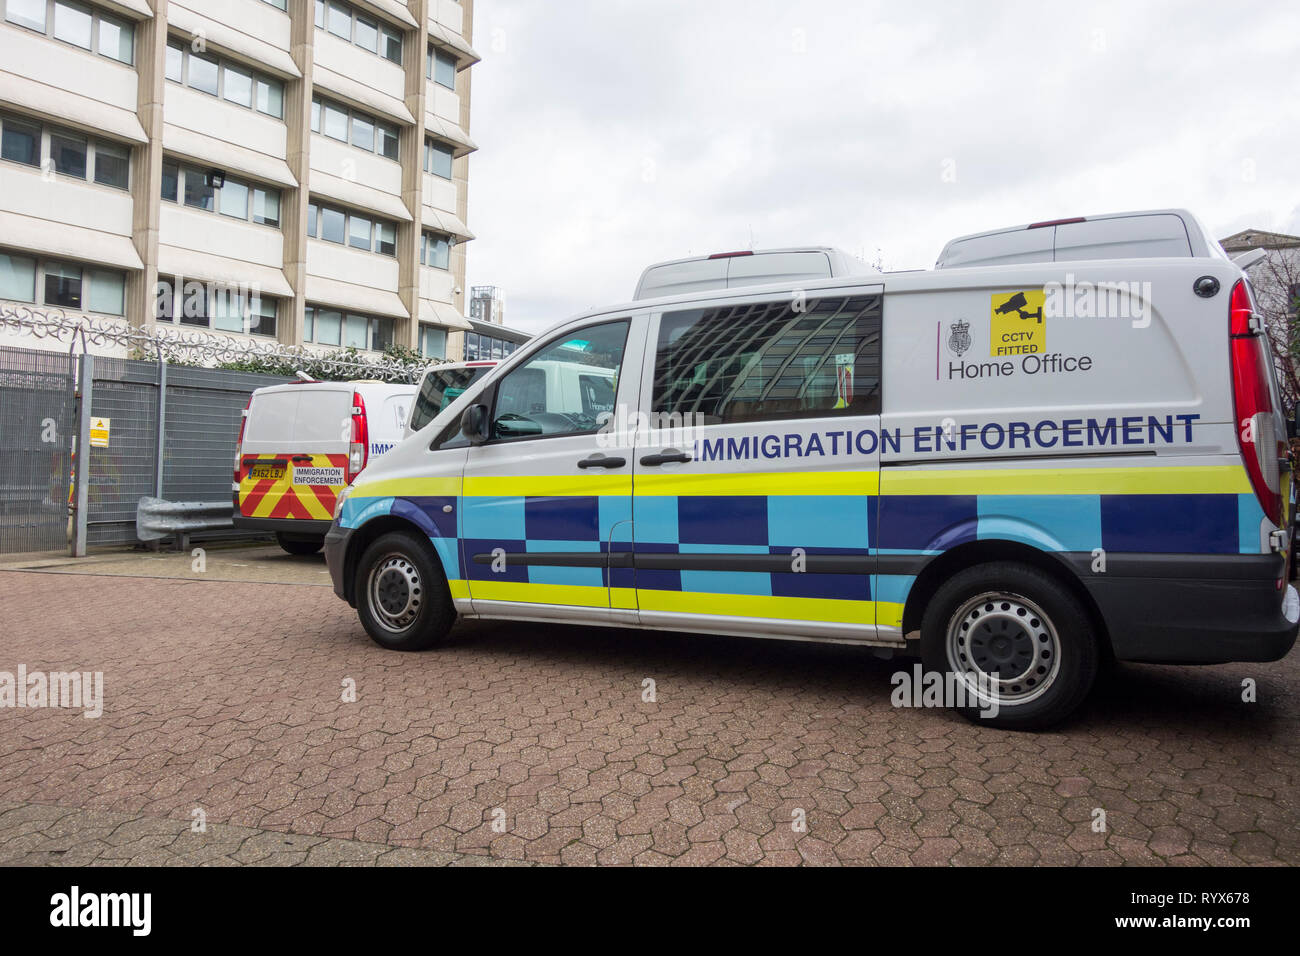 Home Office Immigration Enforcement van parked outside a building in London, England, UK Stock Photo